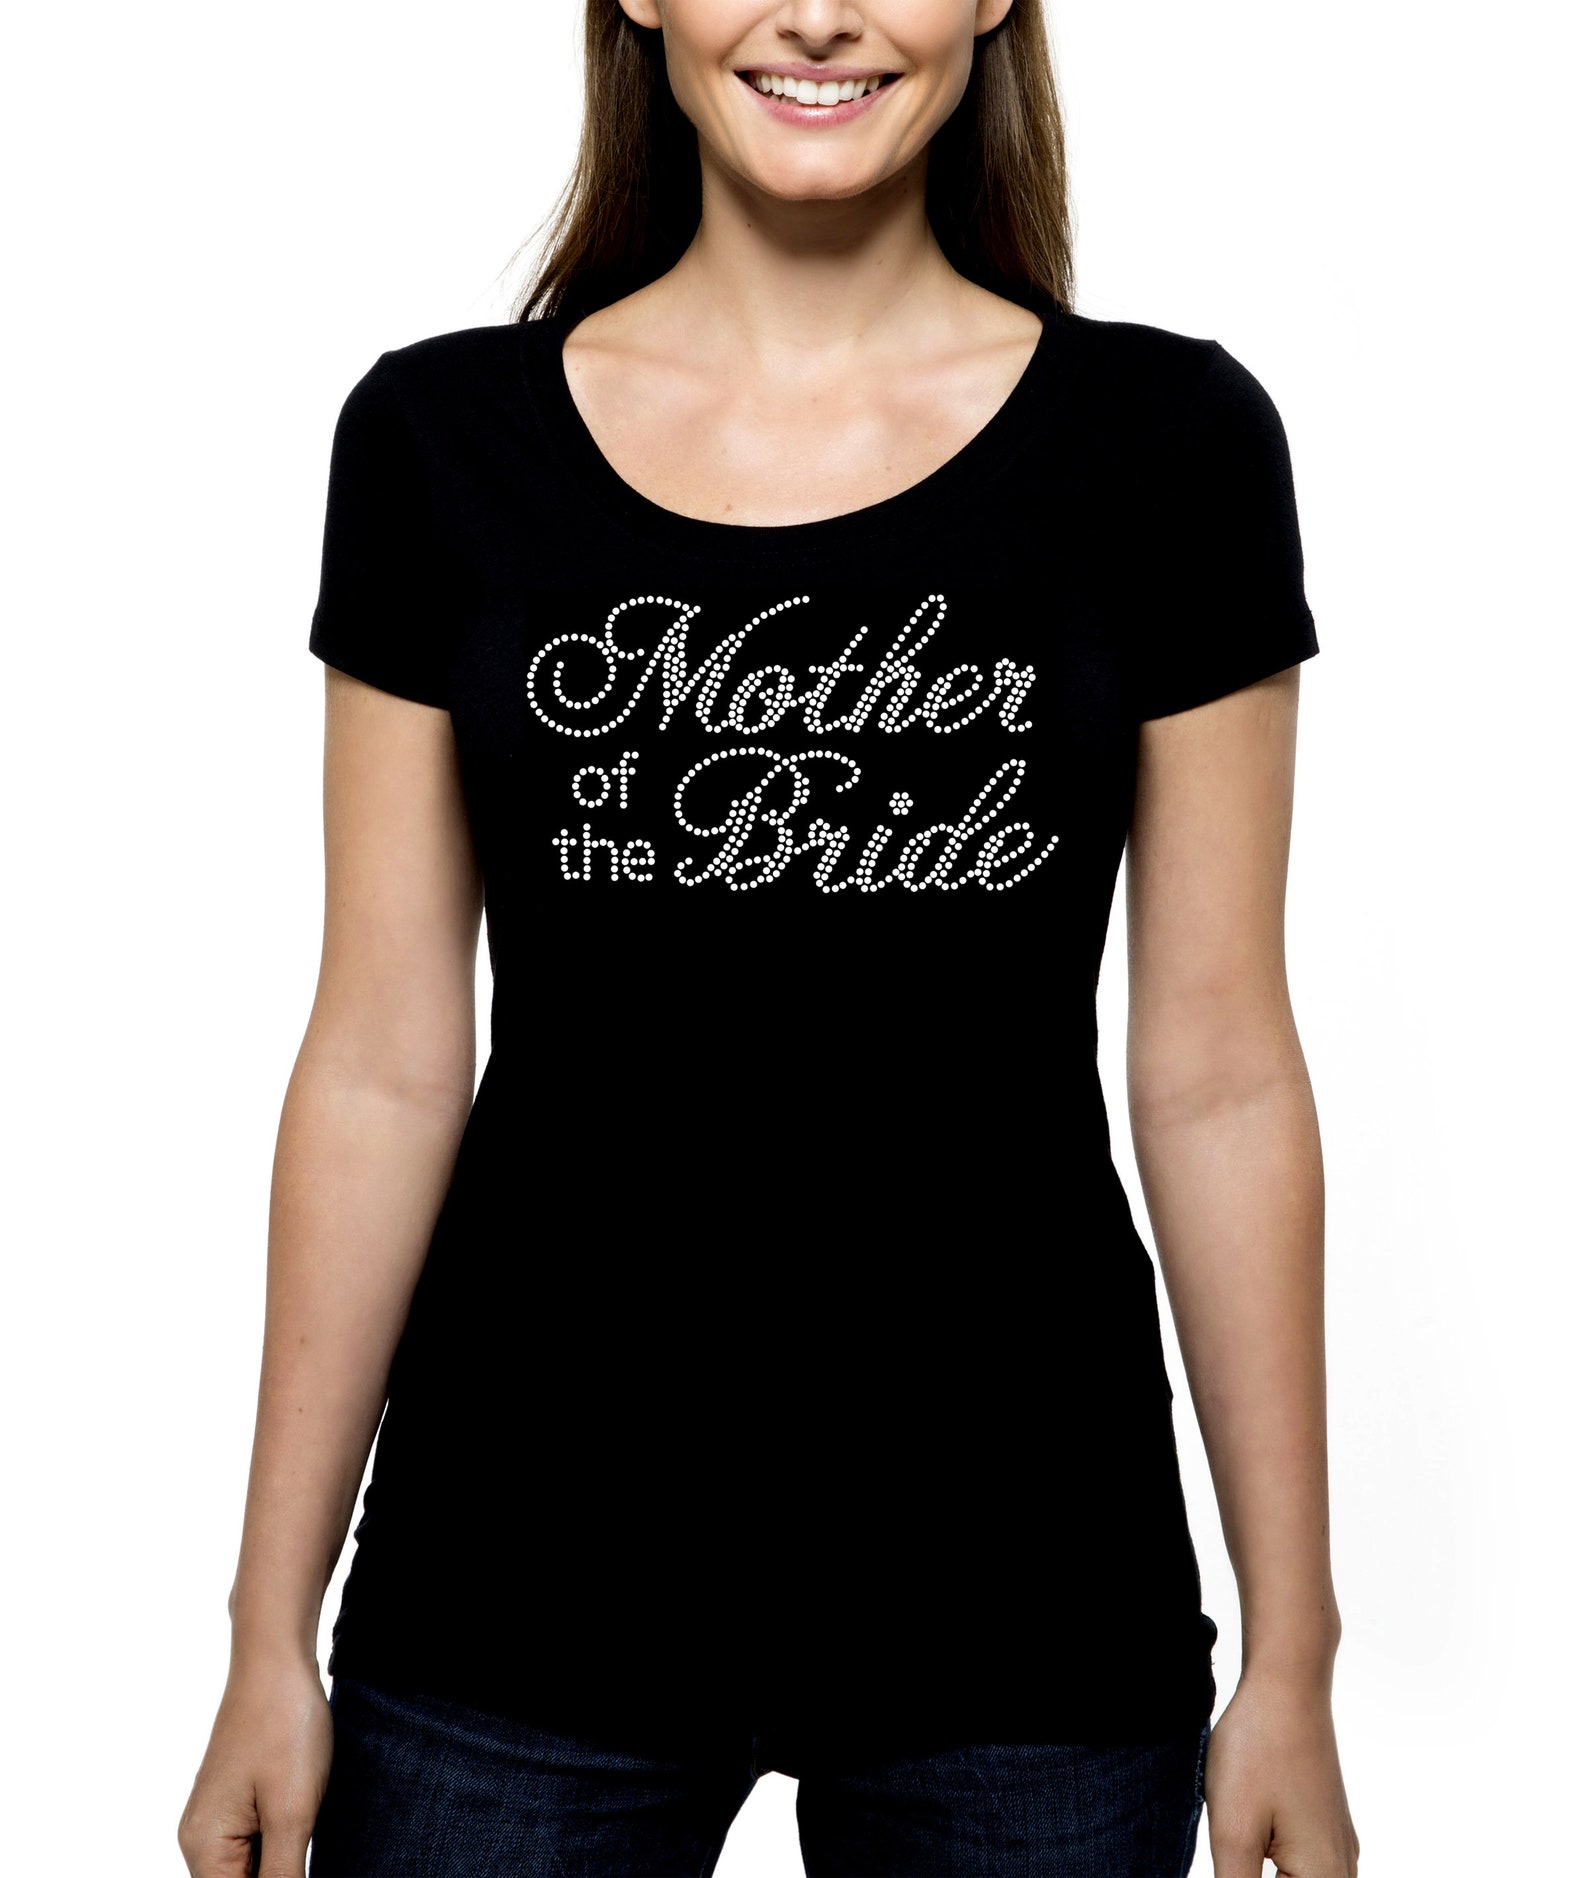 Mother of the Bride RHINESTONE Bridal T-shirt Tank Top S M | Etsy